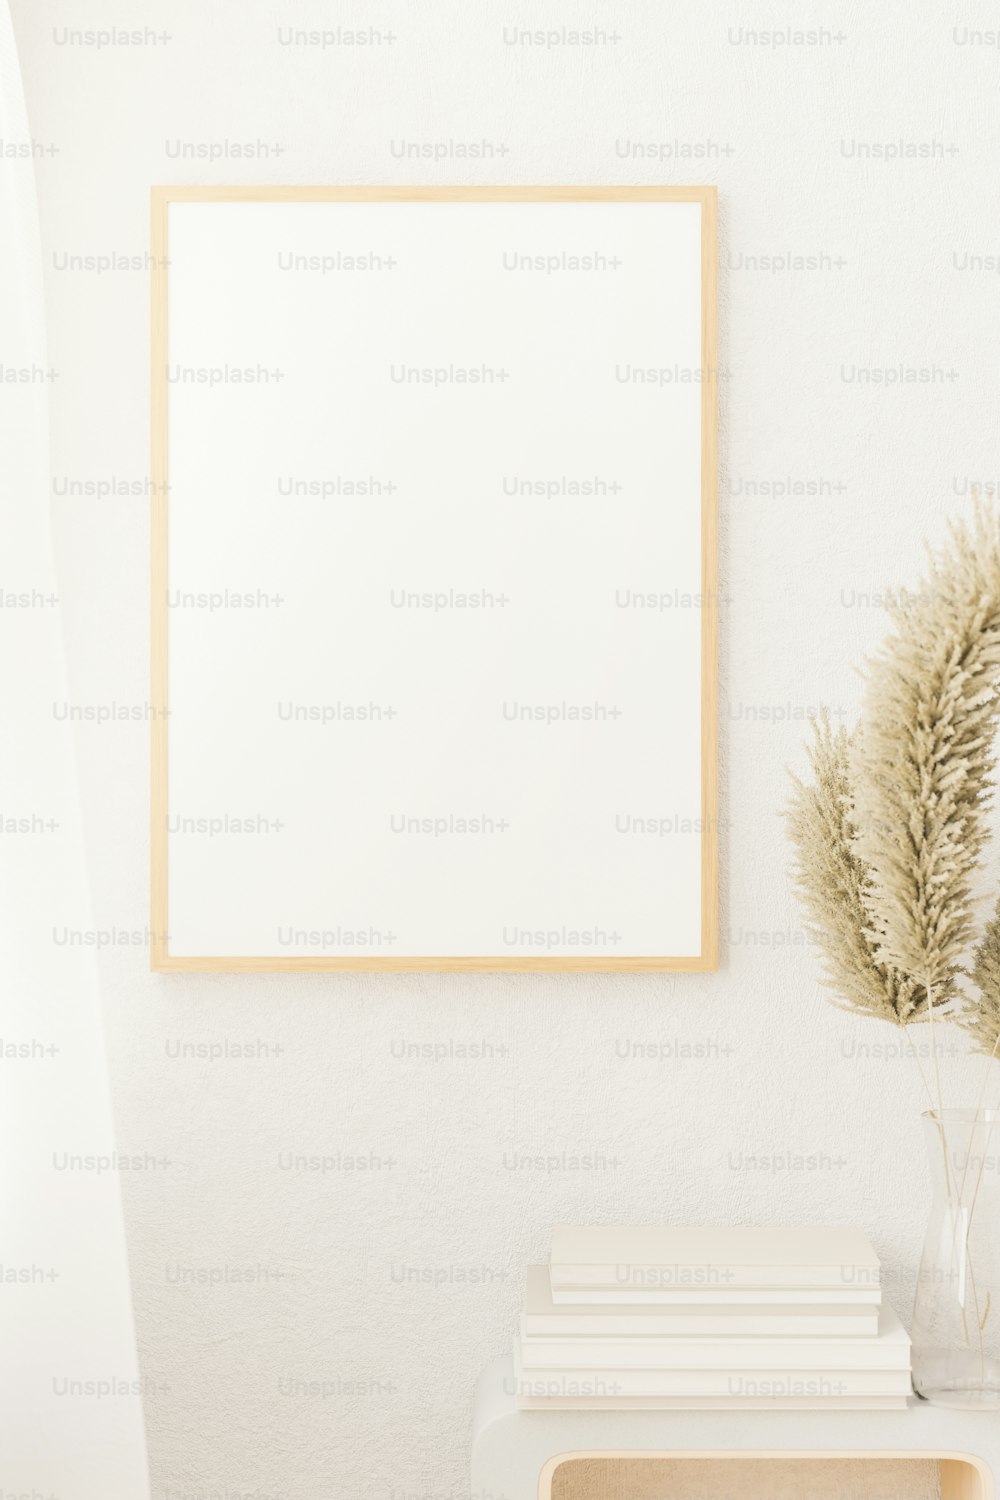 Man Looking At Blank Framed Canvas High-Res Stock Photo - Getty Images